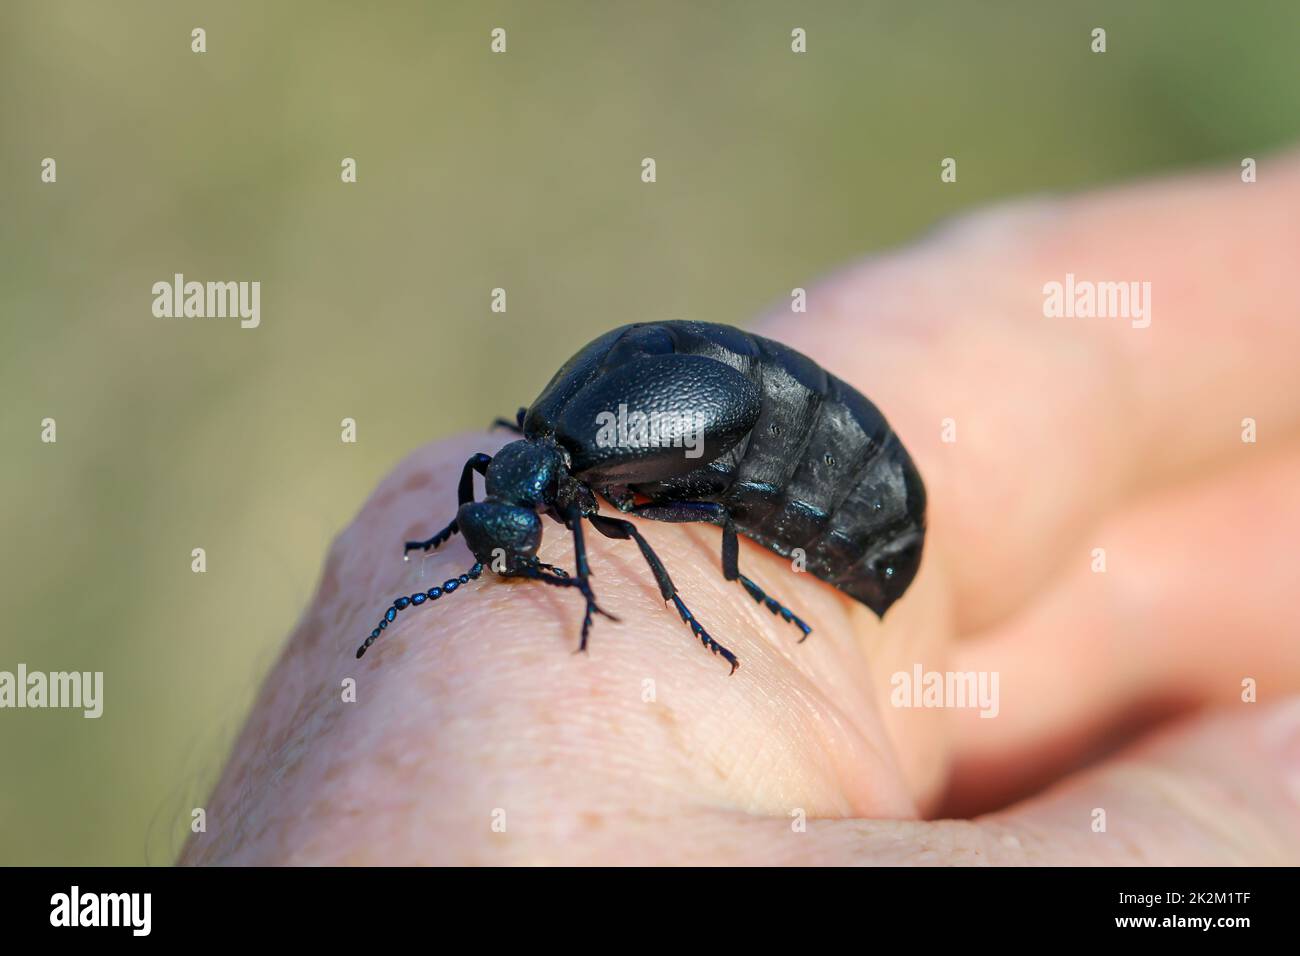 Portrait of a black blue oil beetle. These beetles are poisonous and secrete a toxic yellow substance. Stock Photo